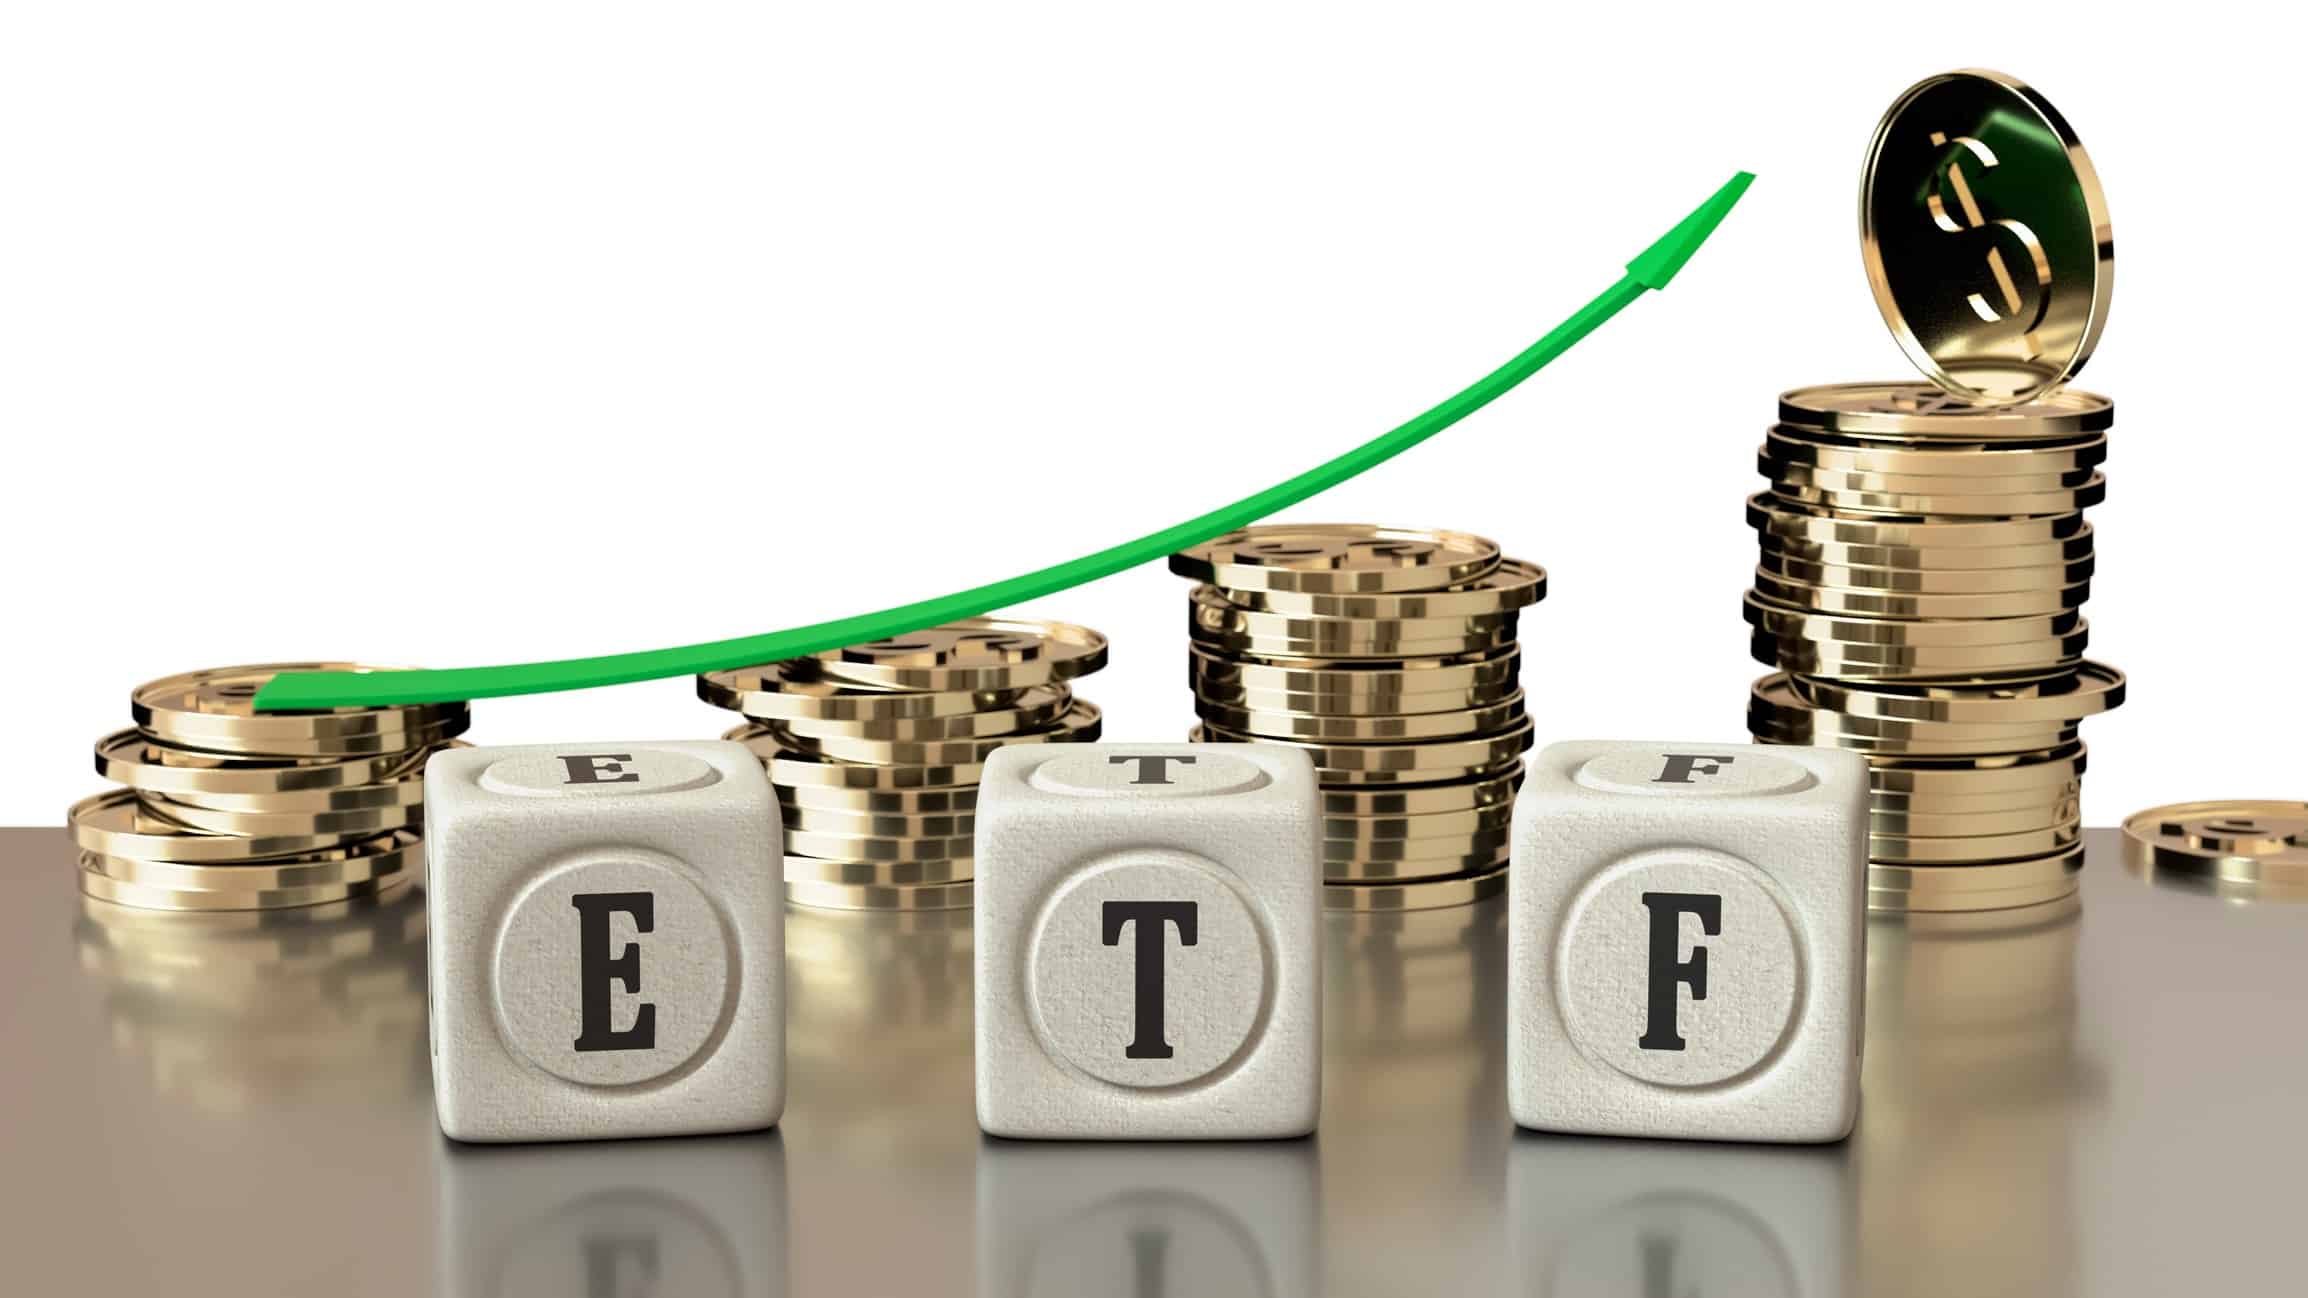 ETF on white blocks with a rising arrow on top of coin piles.